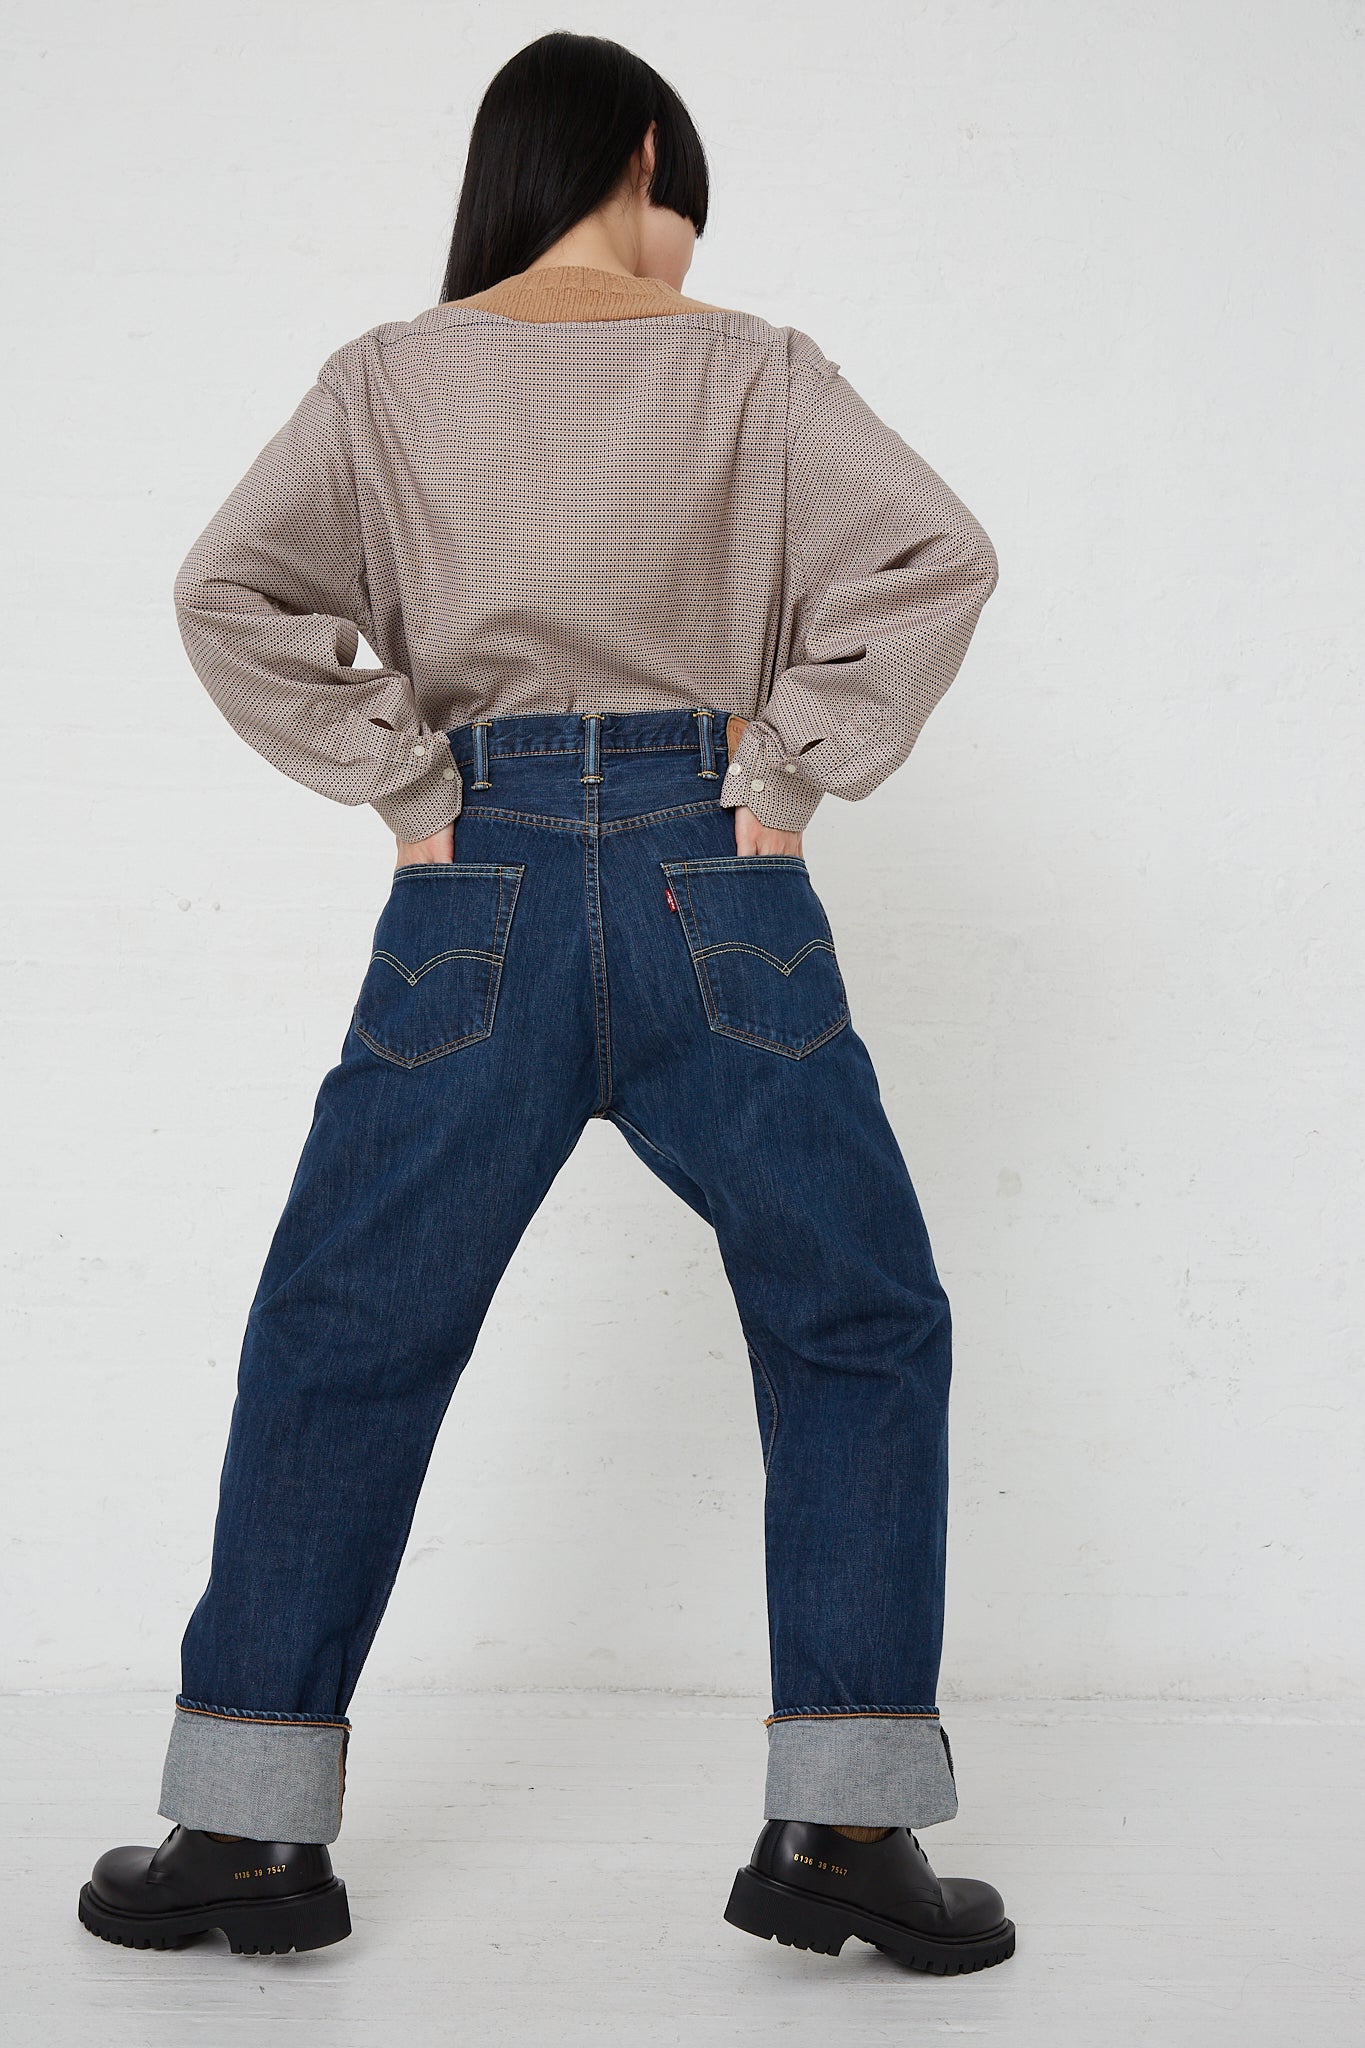 A woman wearing a pair of Bless No. 75 SMLXL Readymade Vintage Levis in Dark Blue jeans posing in front of a white wall.